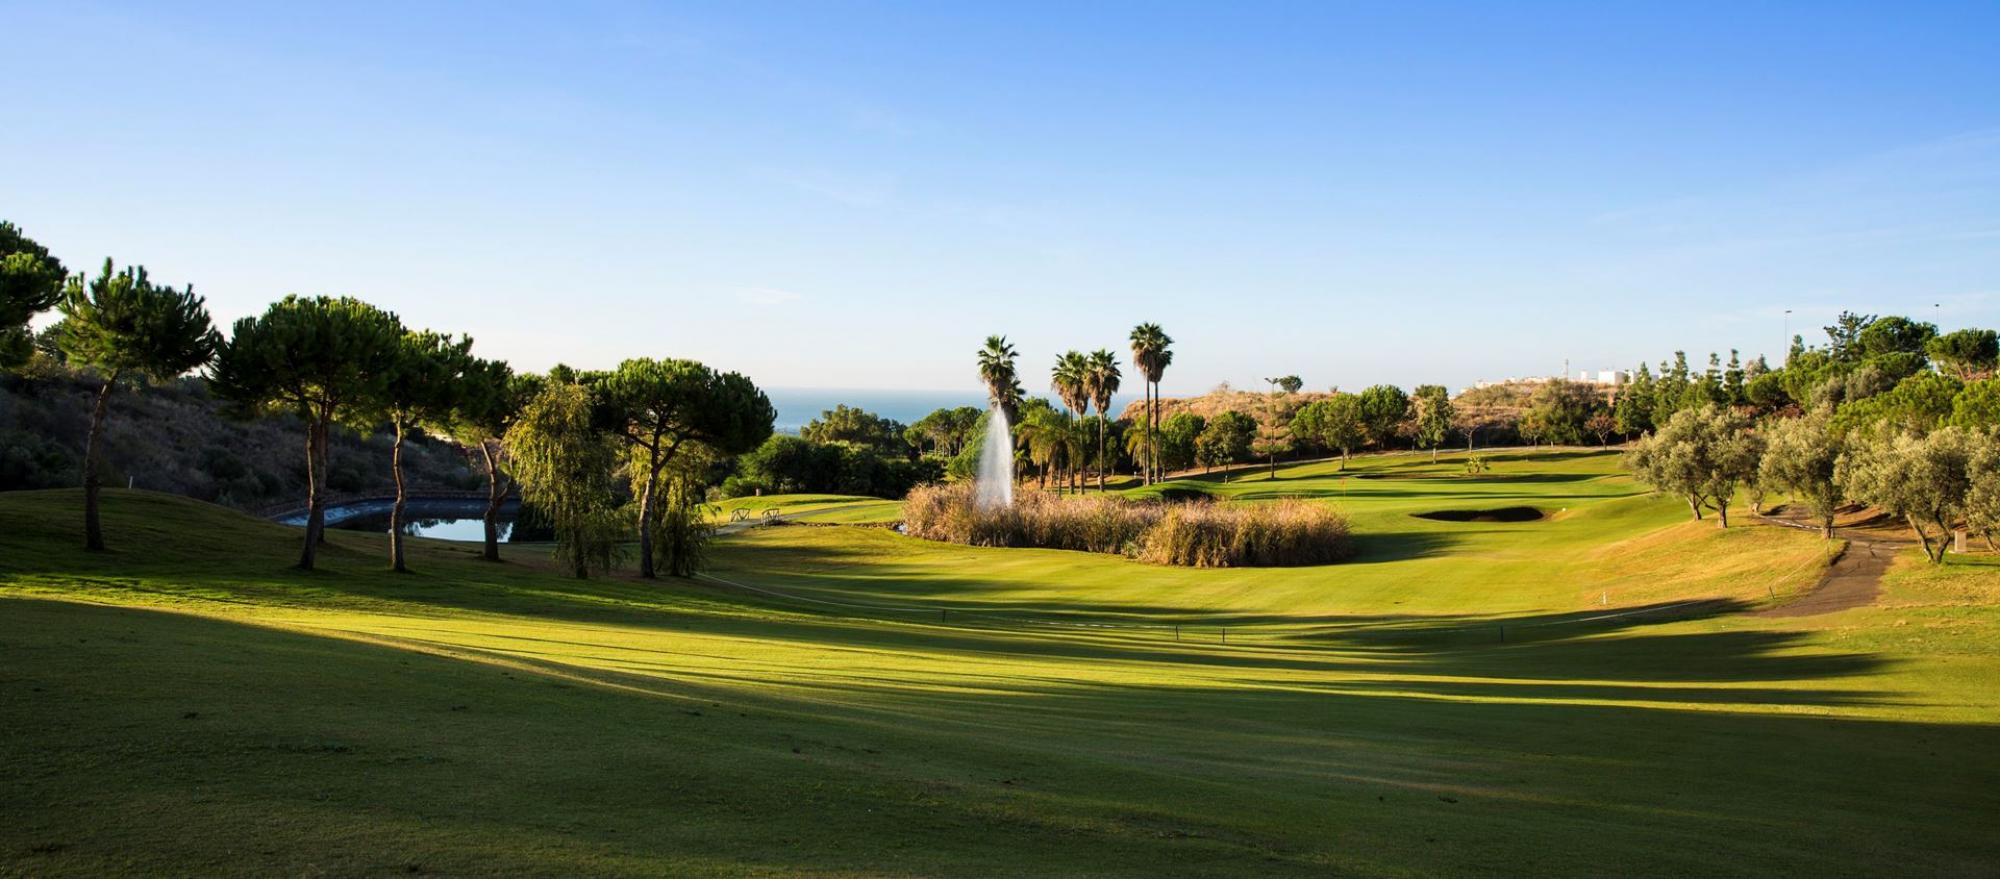 The Anoreta Golf Club's lovely golf course situated in vibrant Costa Del Sol.